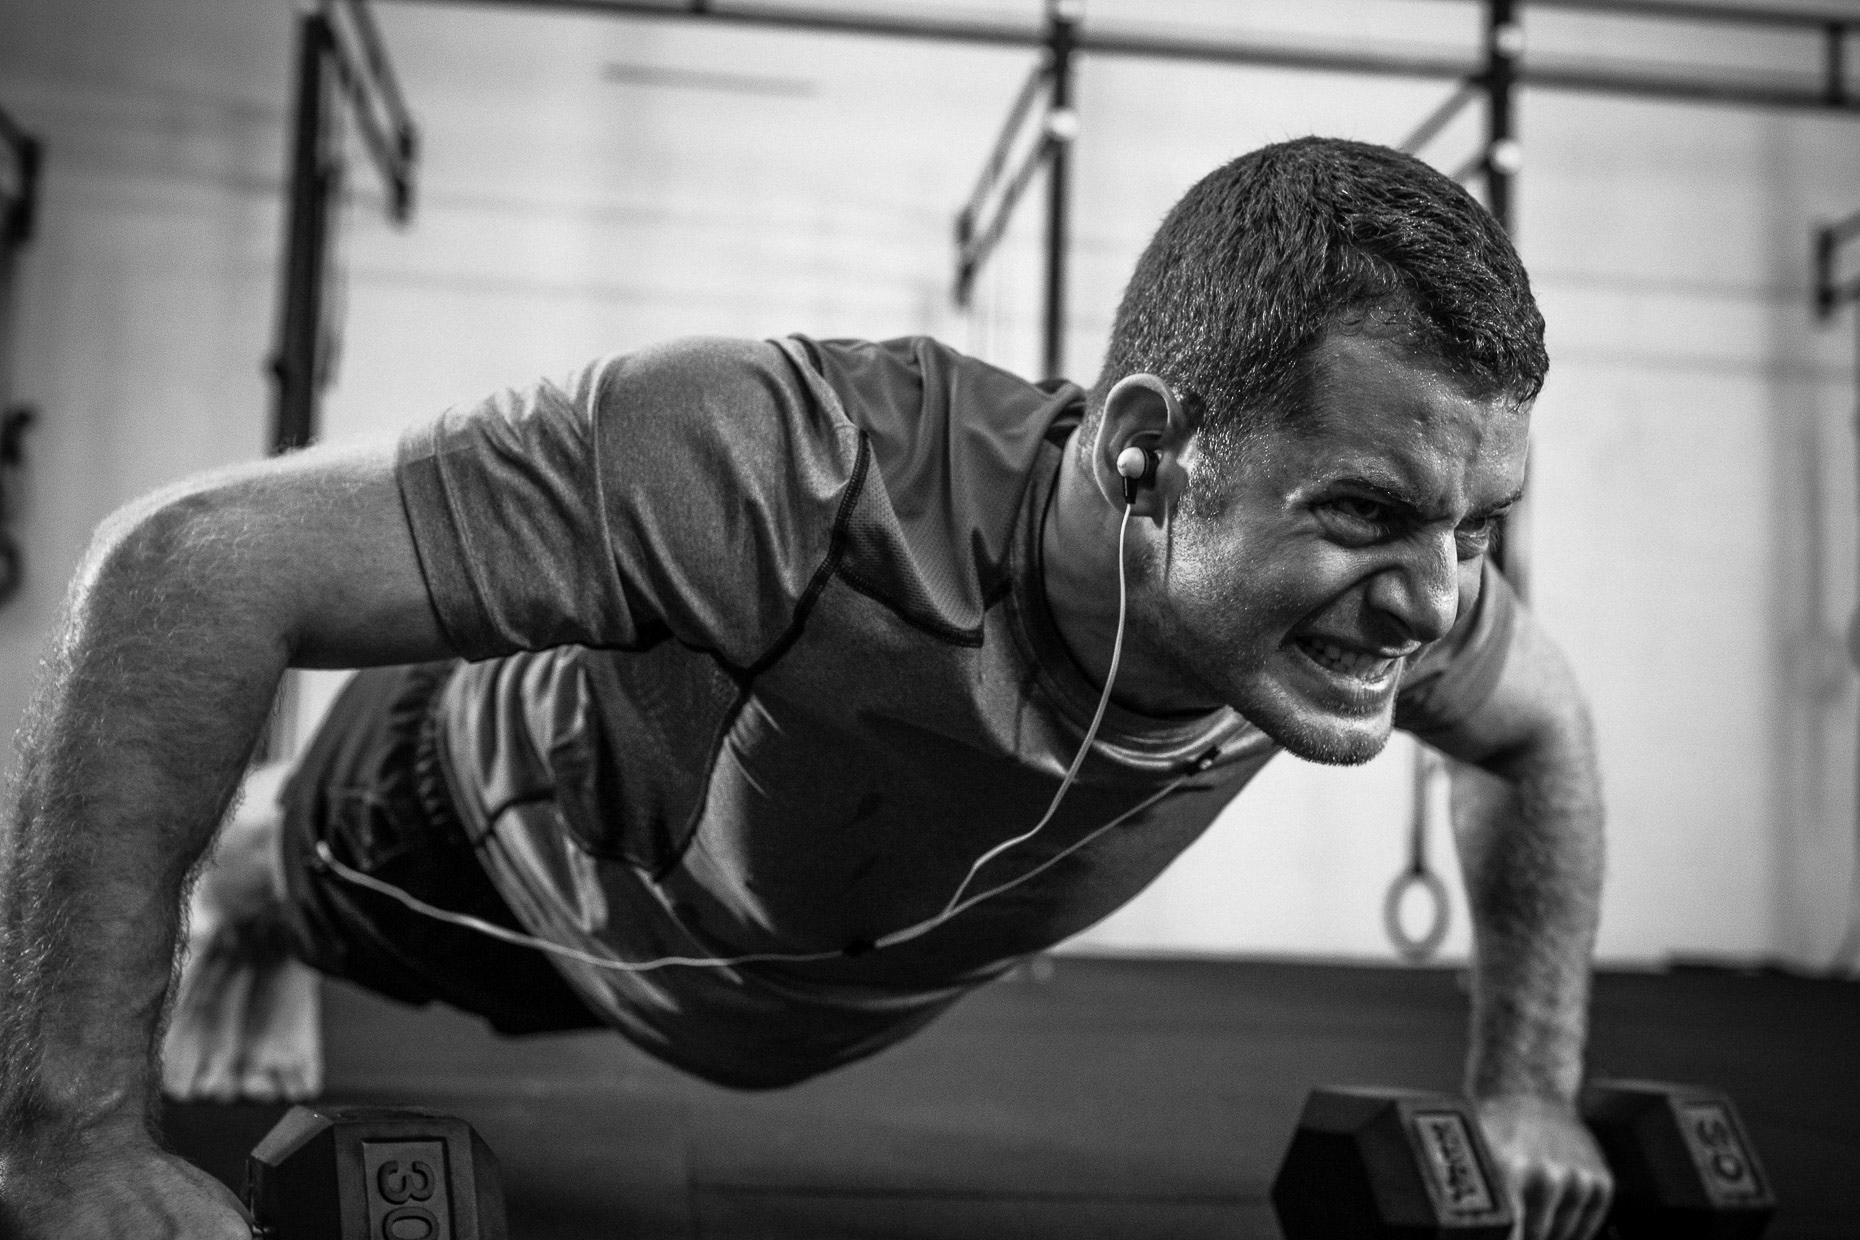 Gym training pushups for Monster iSport with MMA fighter athlete Will Hatcher in a crossfit gym by Andy Batt